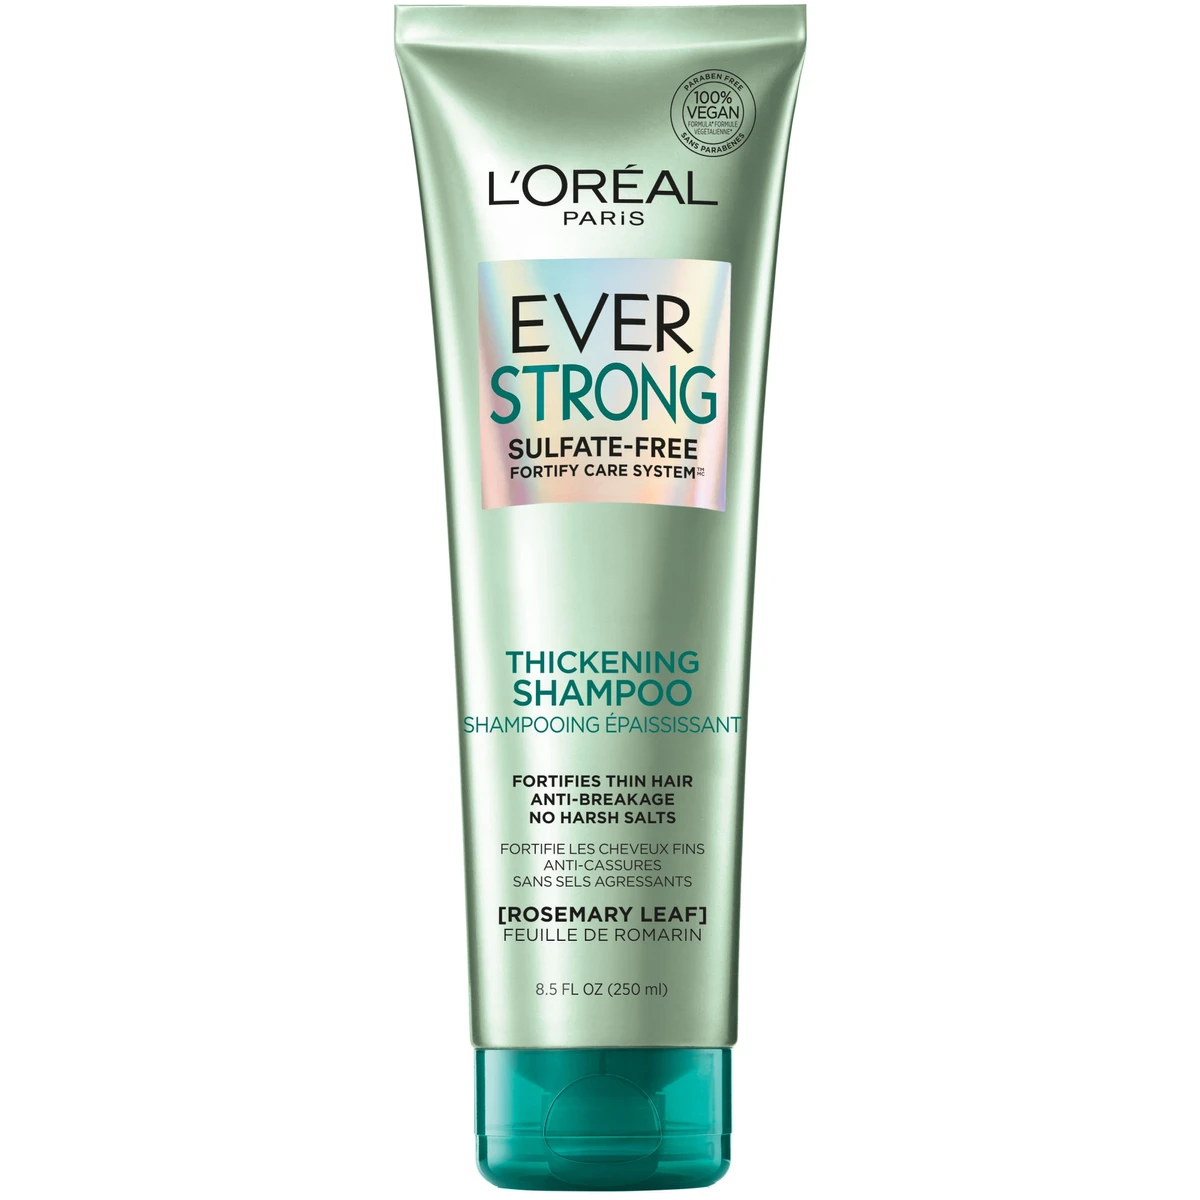 L'Oreal Paris EverStrong Thickening Shampoo